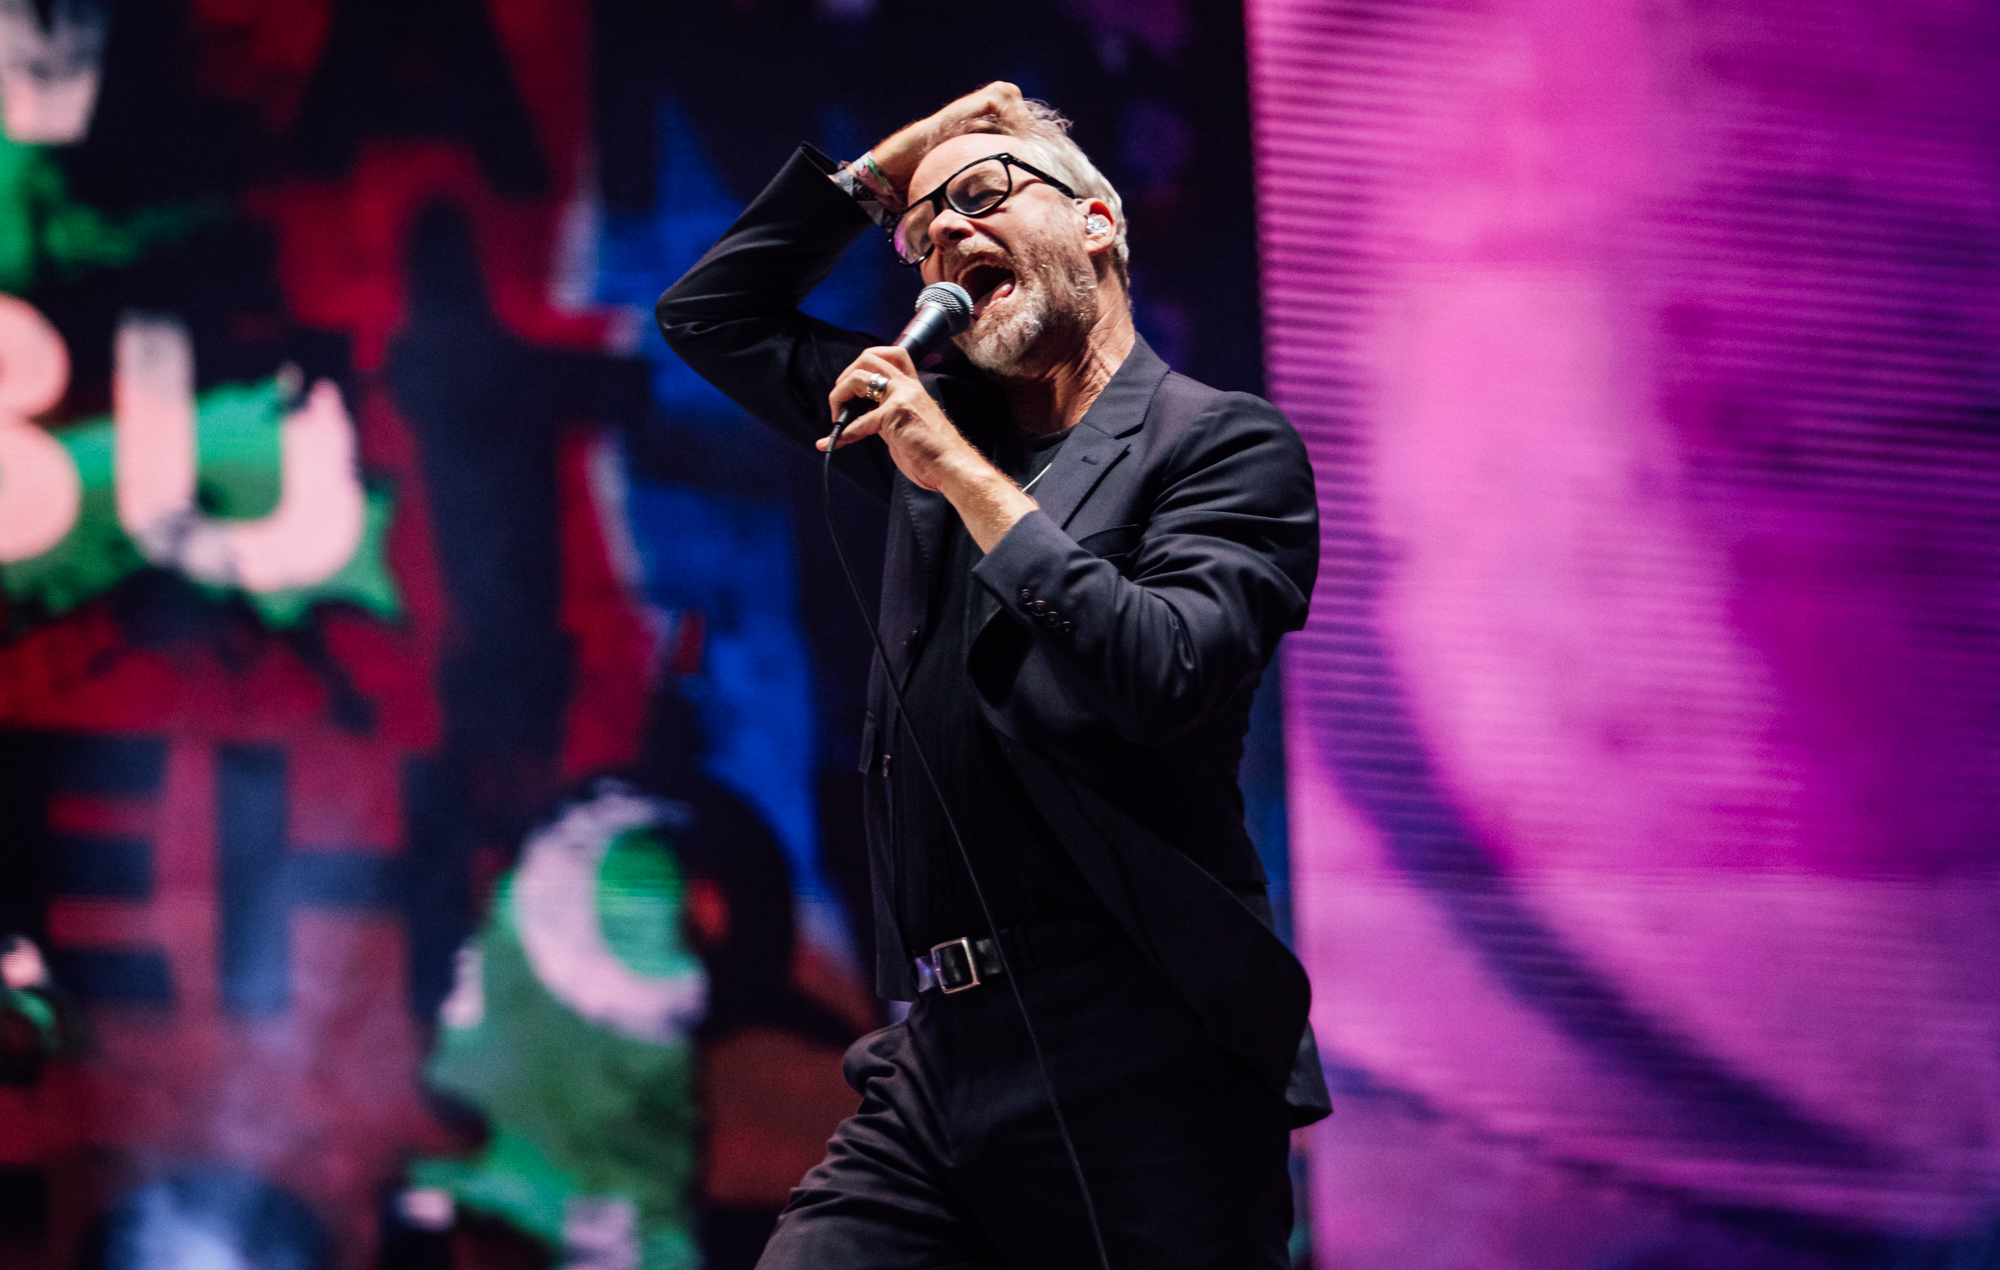 The National talk returning to Glastonbury – and a dream supergroup with IDLES, Fontaines D.C. and Ed Sheeran